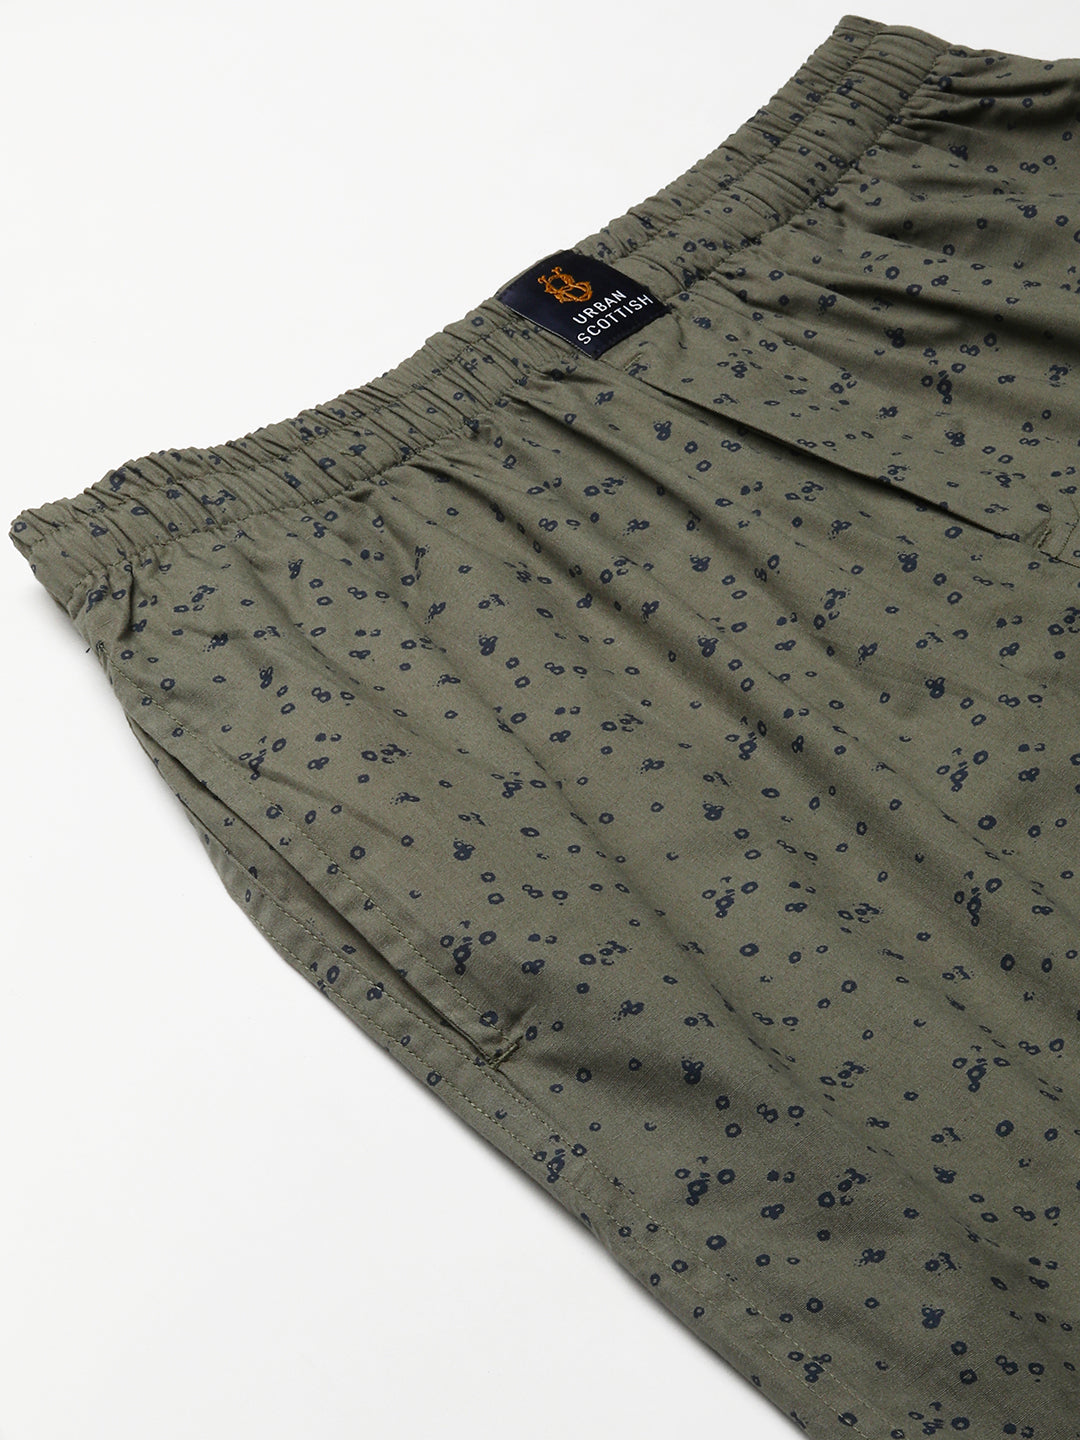 Men's Printed, Olive, Cotton, Regular Fit, Elasticated, Waistband, Pyjama  With Side Pockets